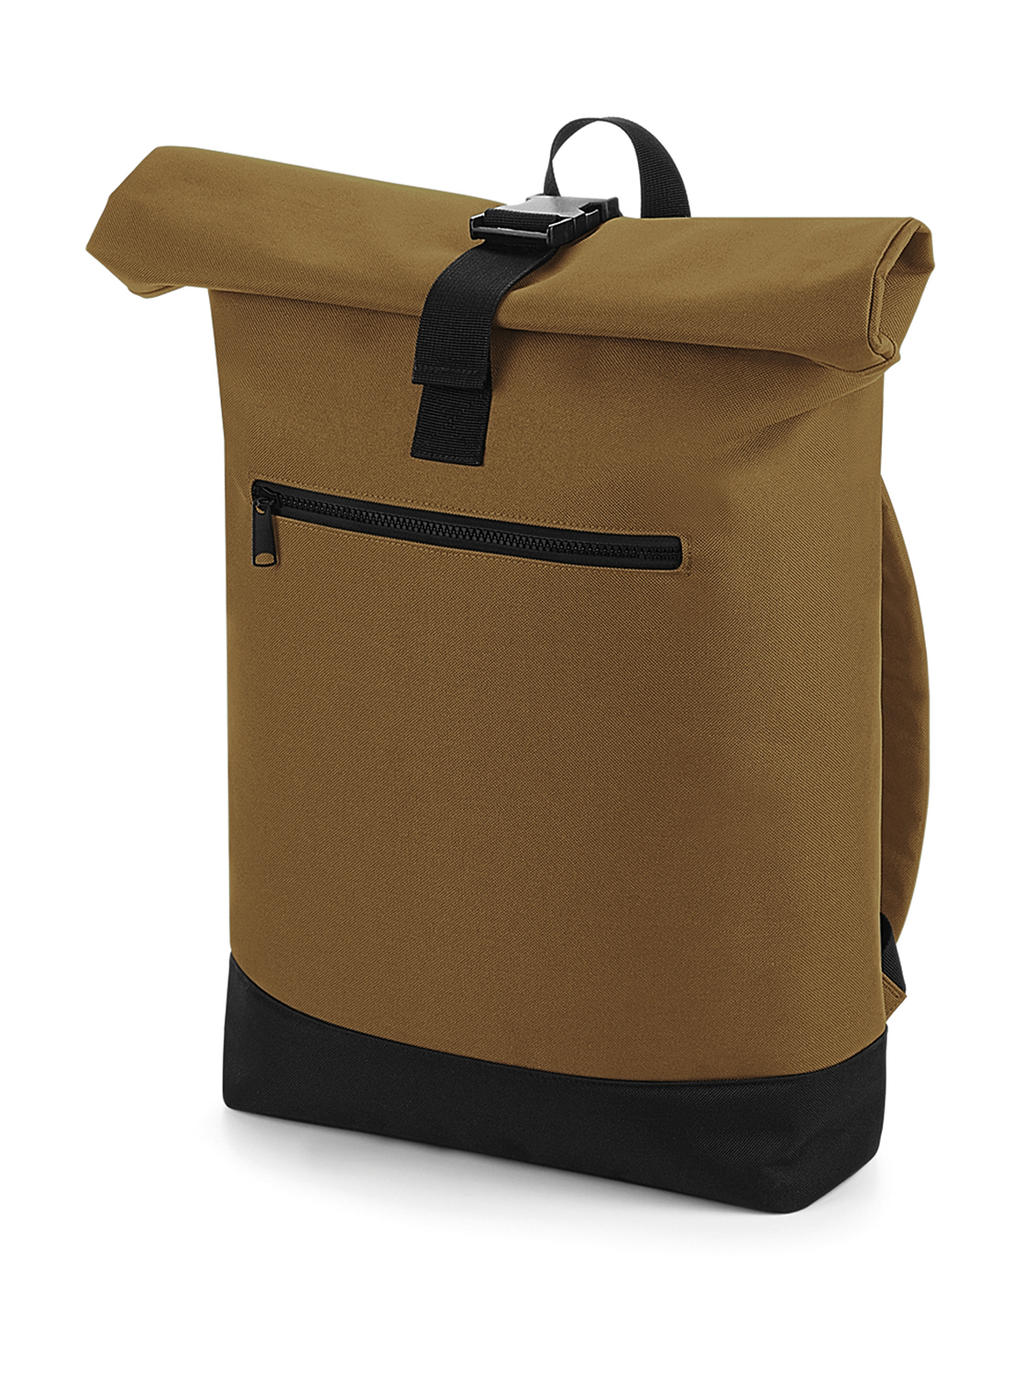  Roll-Top Backpack in Farbe Caramel